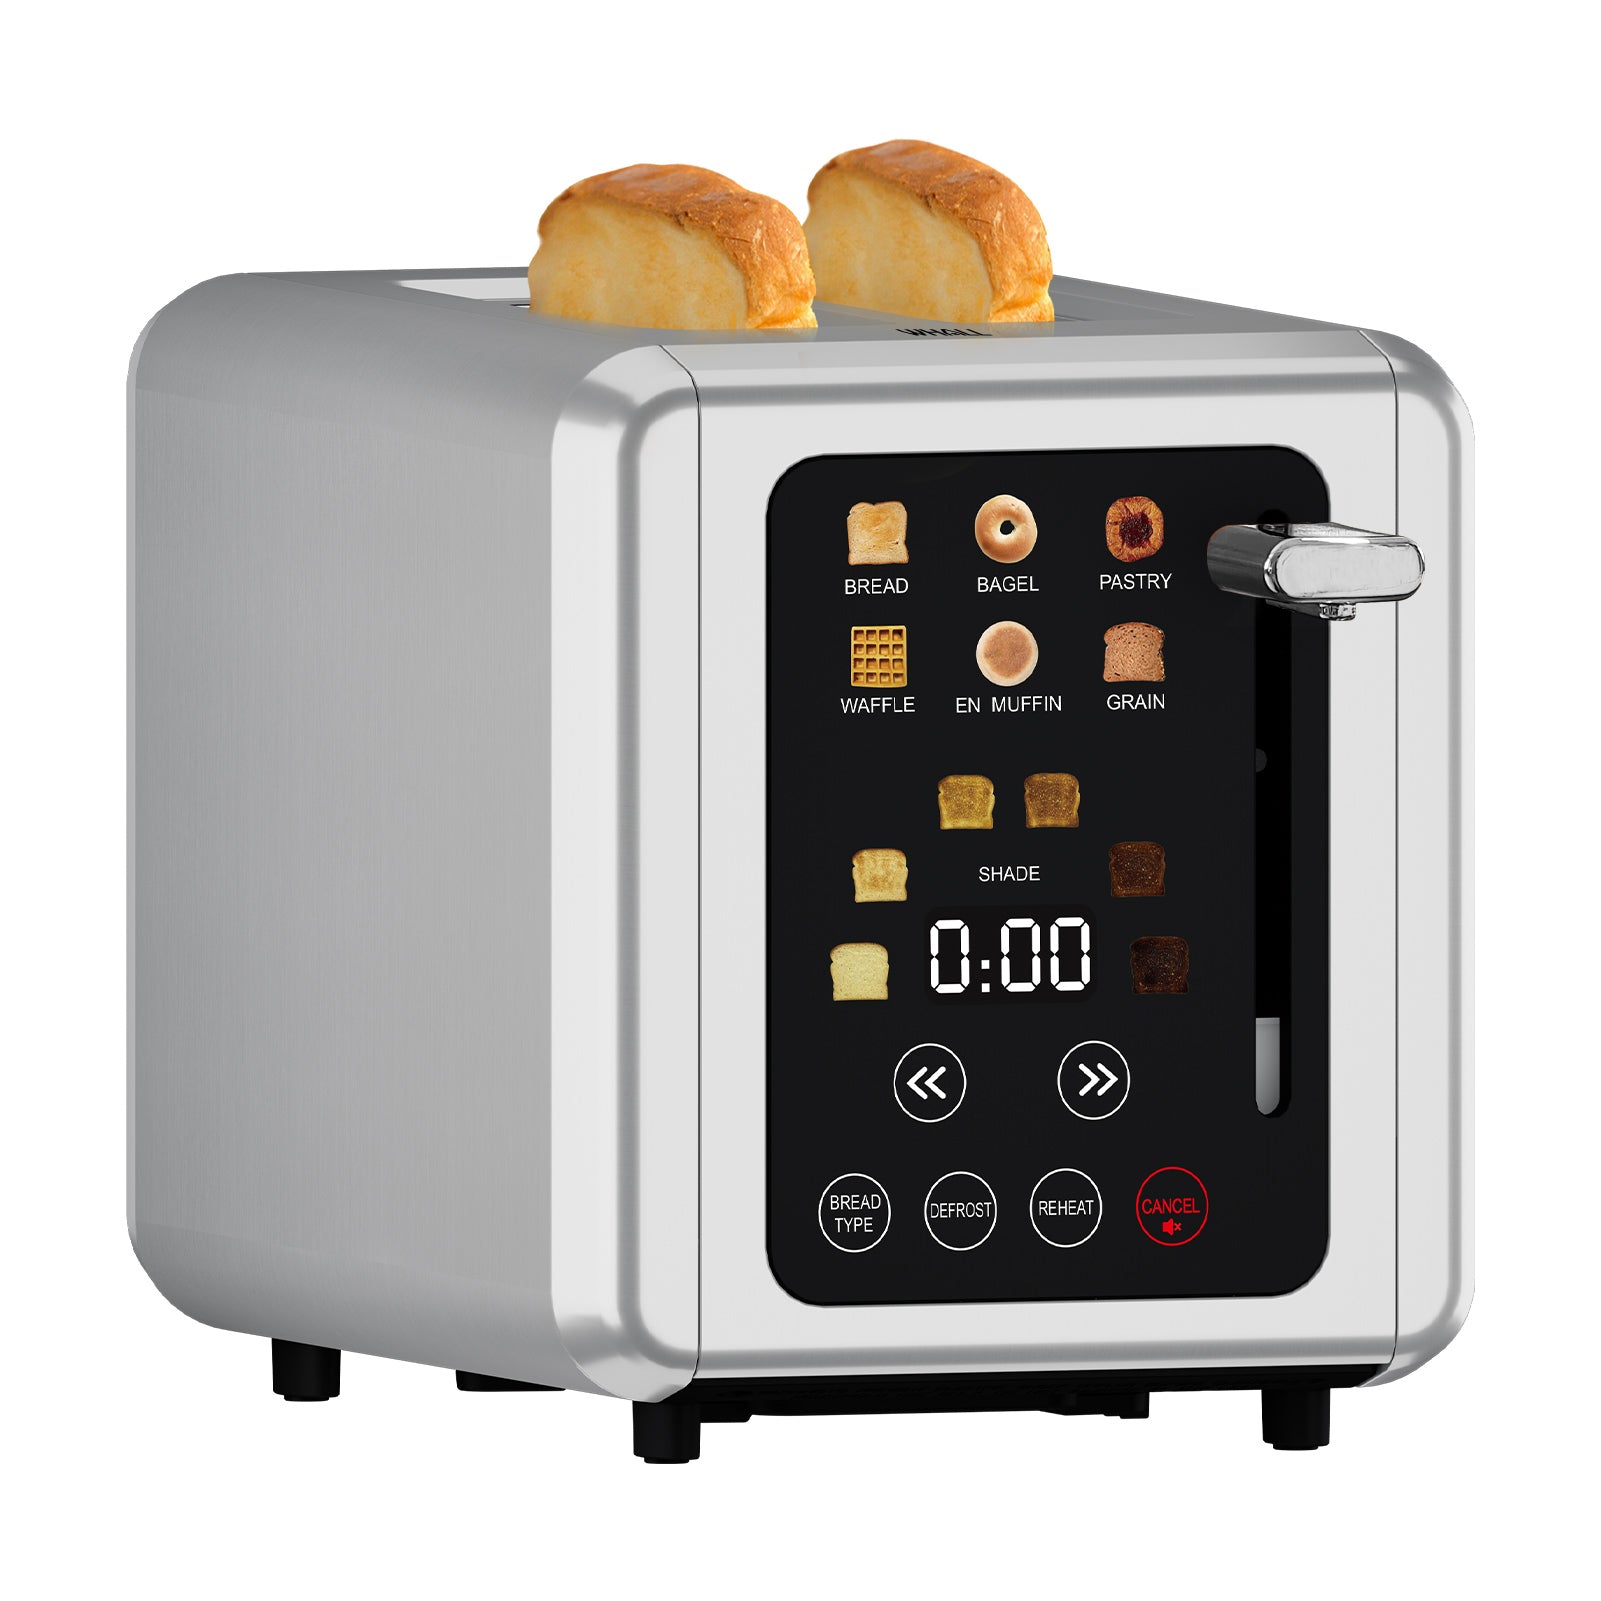 WHALL® Touch Screen Toaster 2 Slice, Stainless Steel Digital Timer Toaster, 6 Bread Types & 6 Shade Settings, Smart Extra Wide Slots Toaster With Bagel, Cancel, Defrost Functions,Sliver Lever